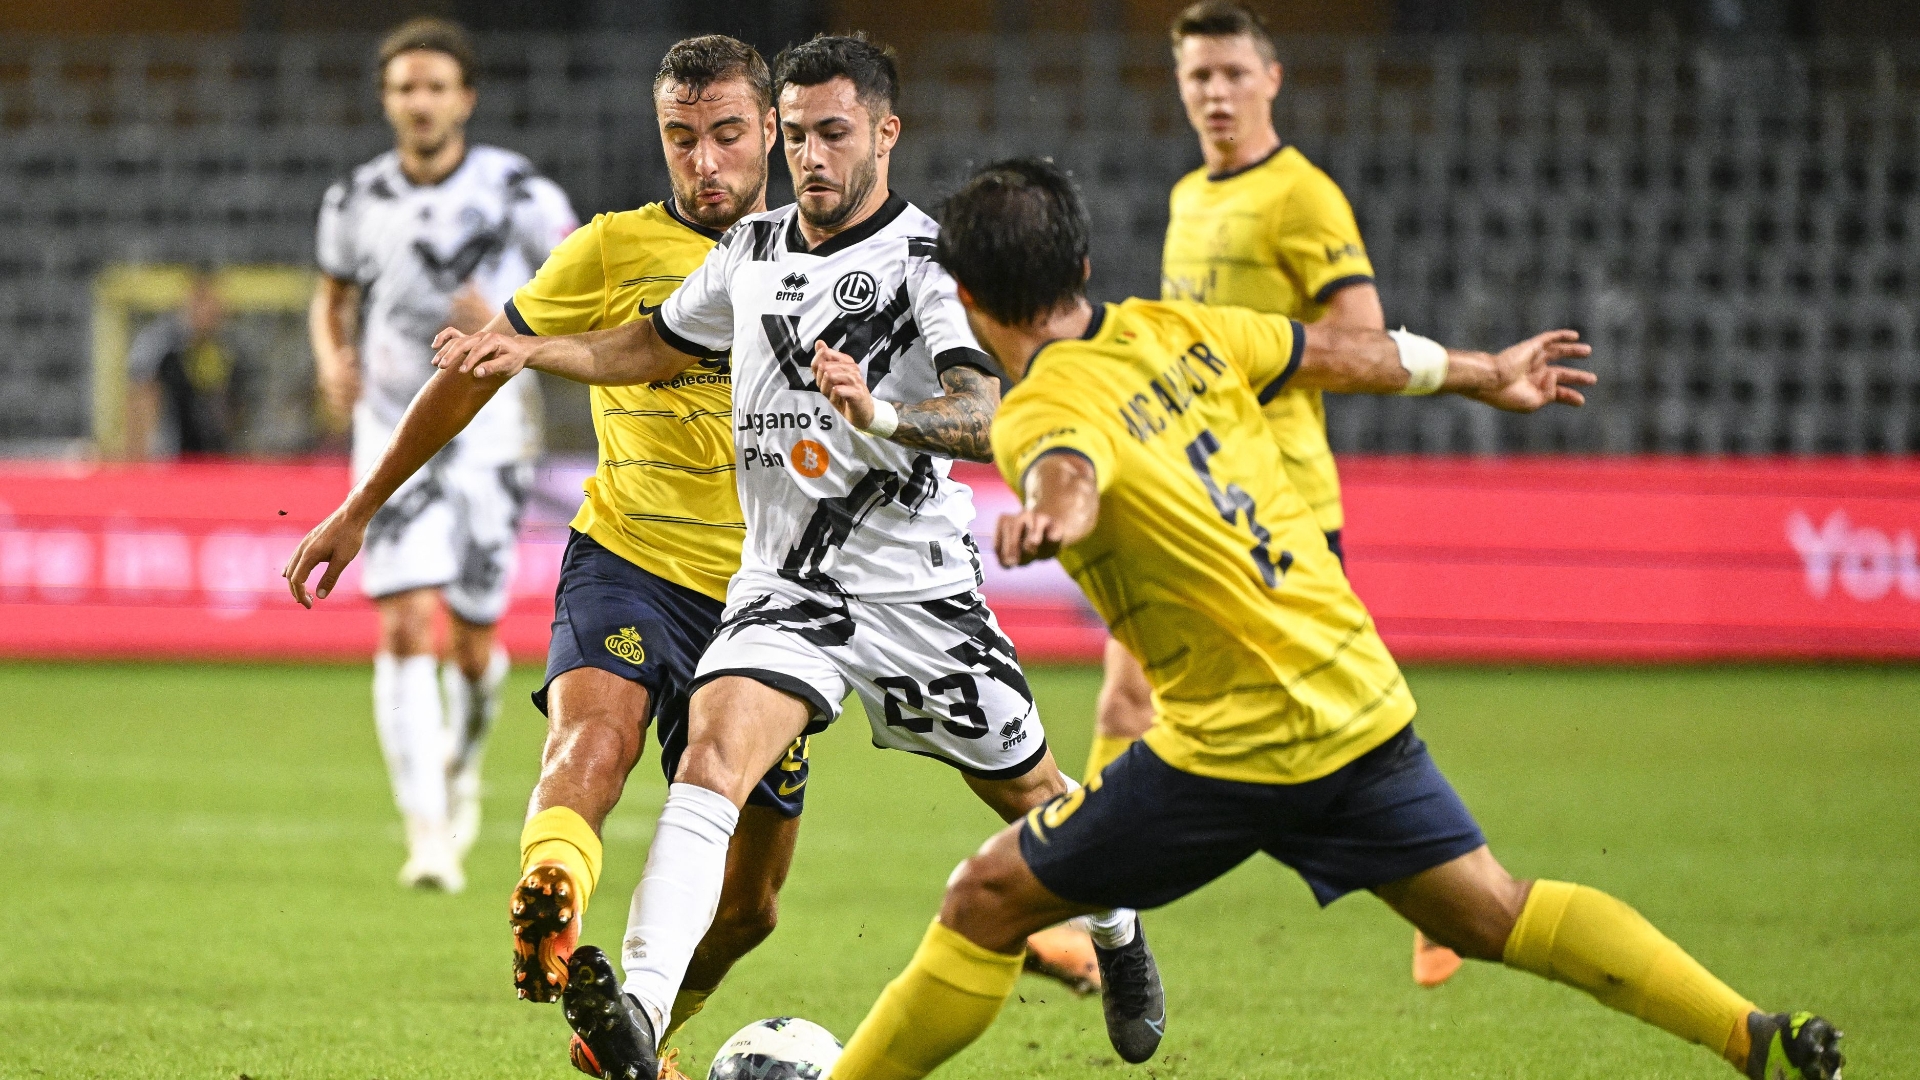 St Gallen vs Stade Lausanne-Ouchy» Predictions, Odds, Live Score